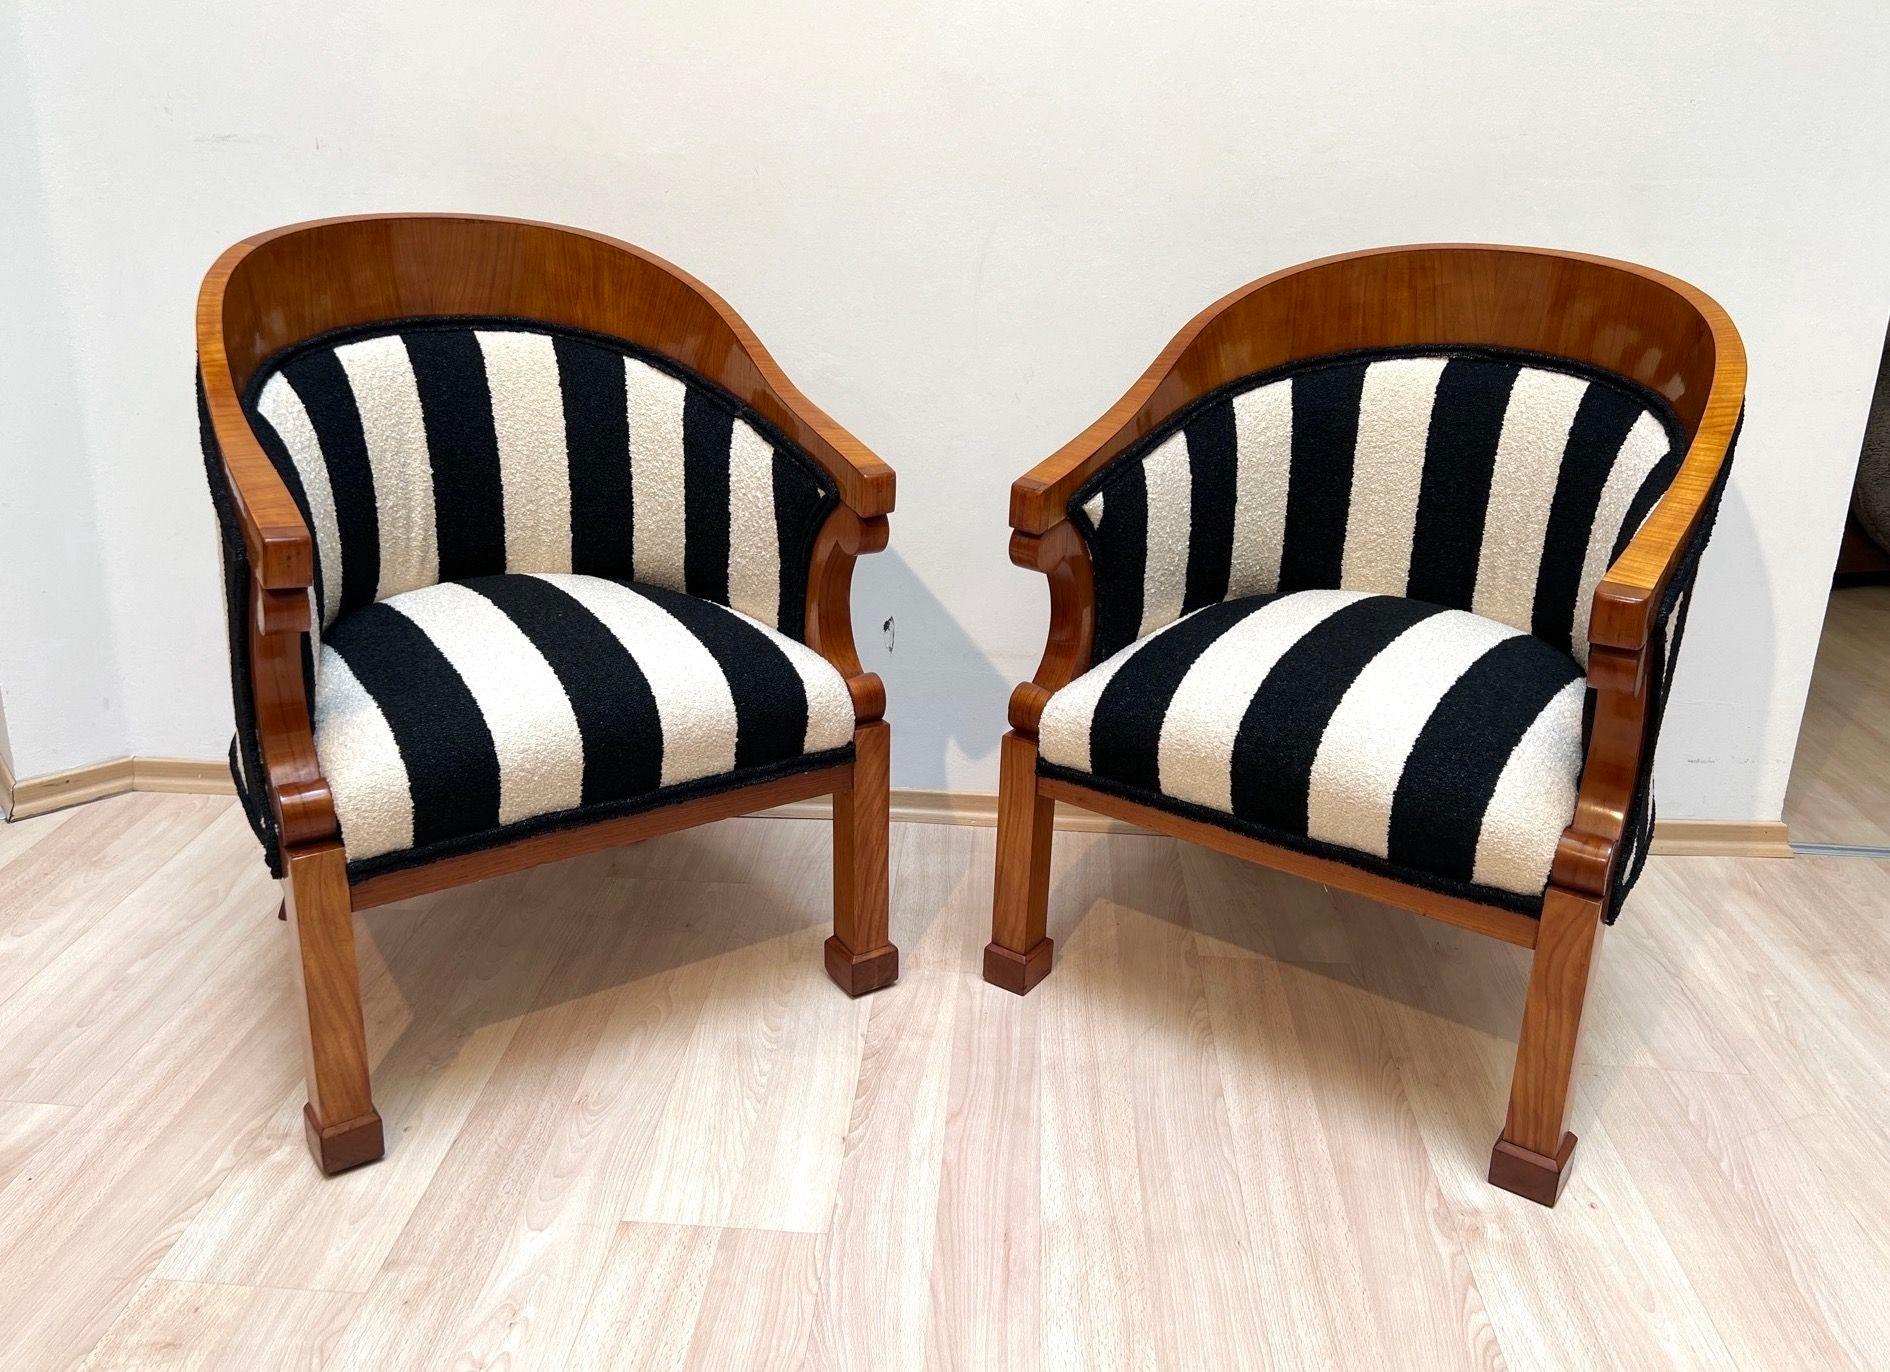 Beautiful pair of original Biedermeier Bergere chairs in cherry wood from Austria around 1830.
Cherry veneer and solid, hand-polished with shellac (french polished). Solid cherry stollen feet. Square tapered conical legs at the back, curved